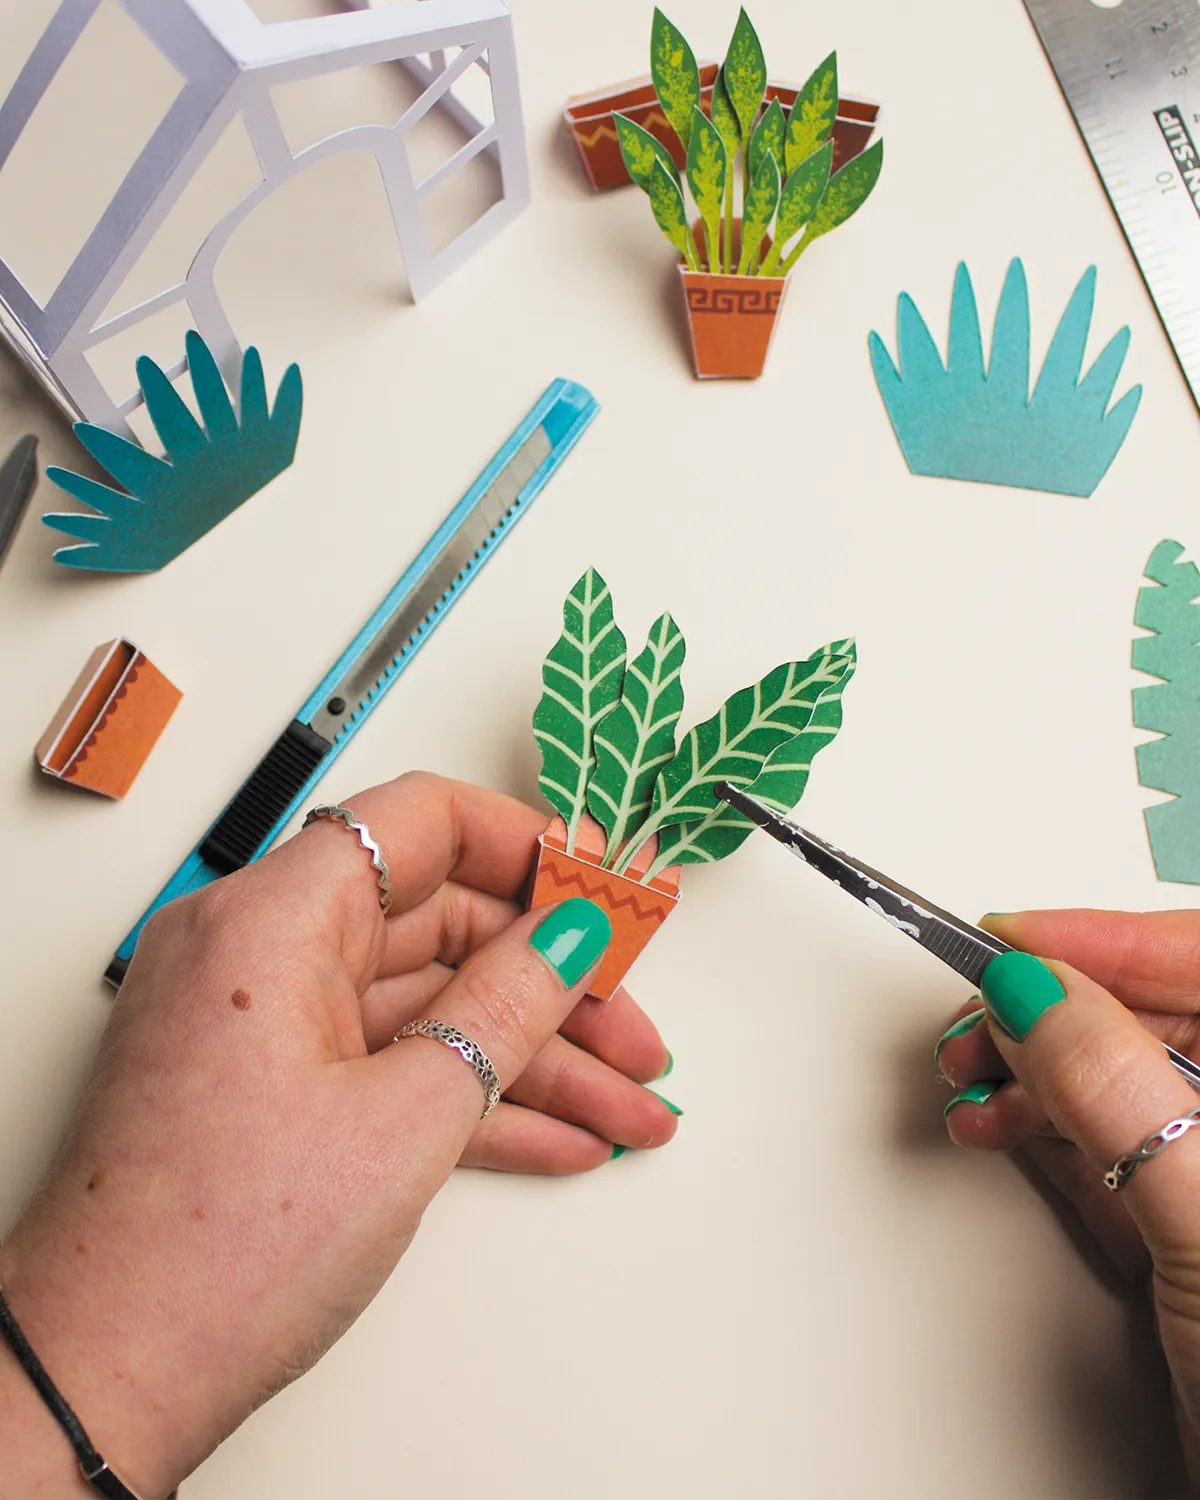 Project Calm: Clare placing fronds into a plant pot, made of paper